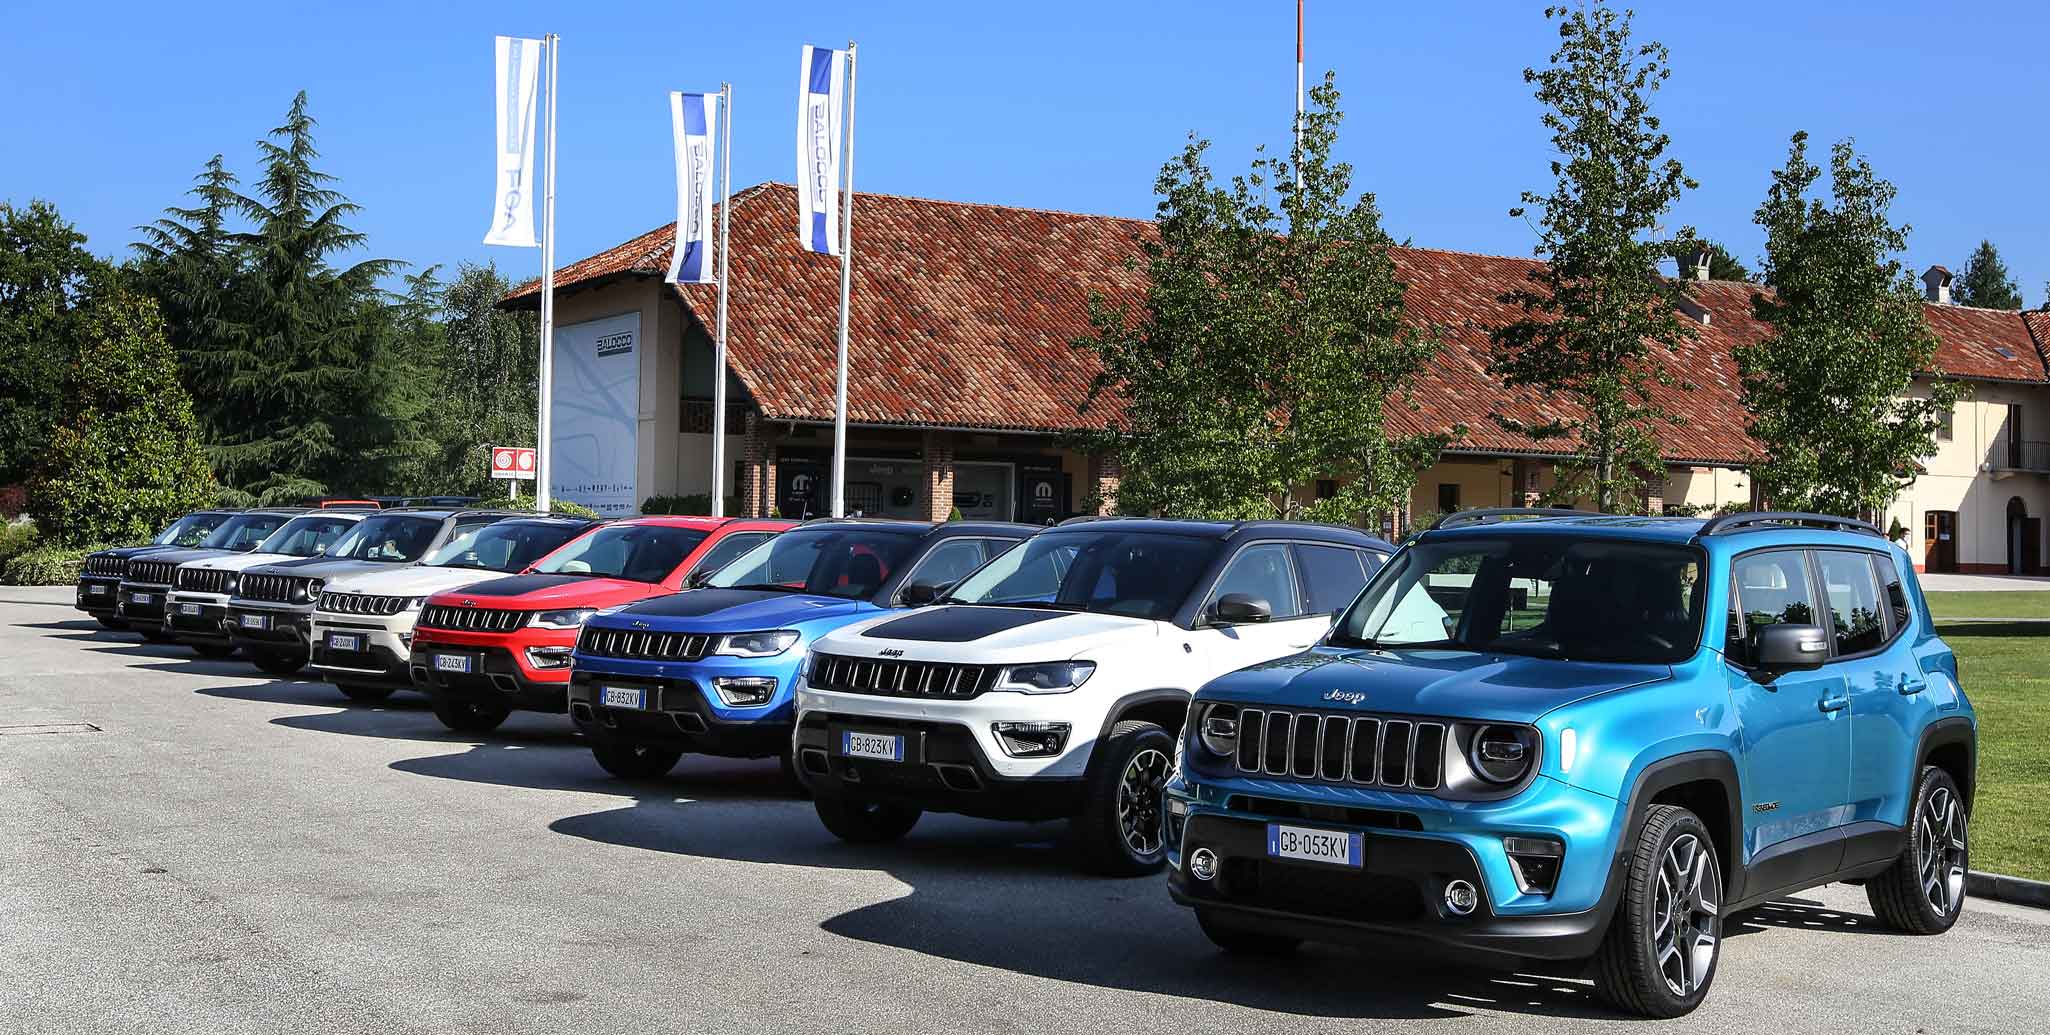 Photos of several Jeeps parked in the courtyard of the farmhouse